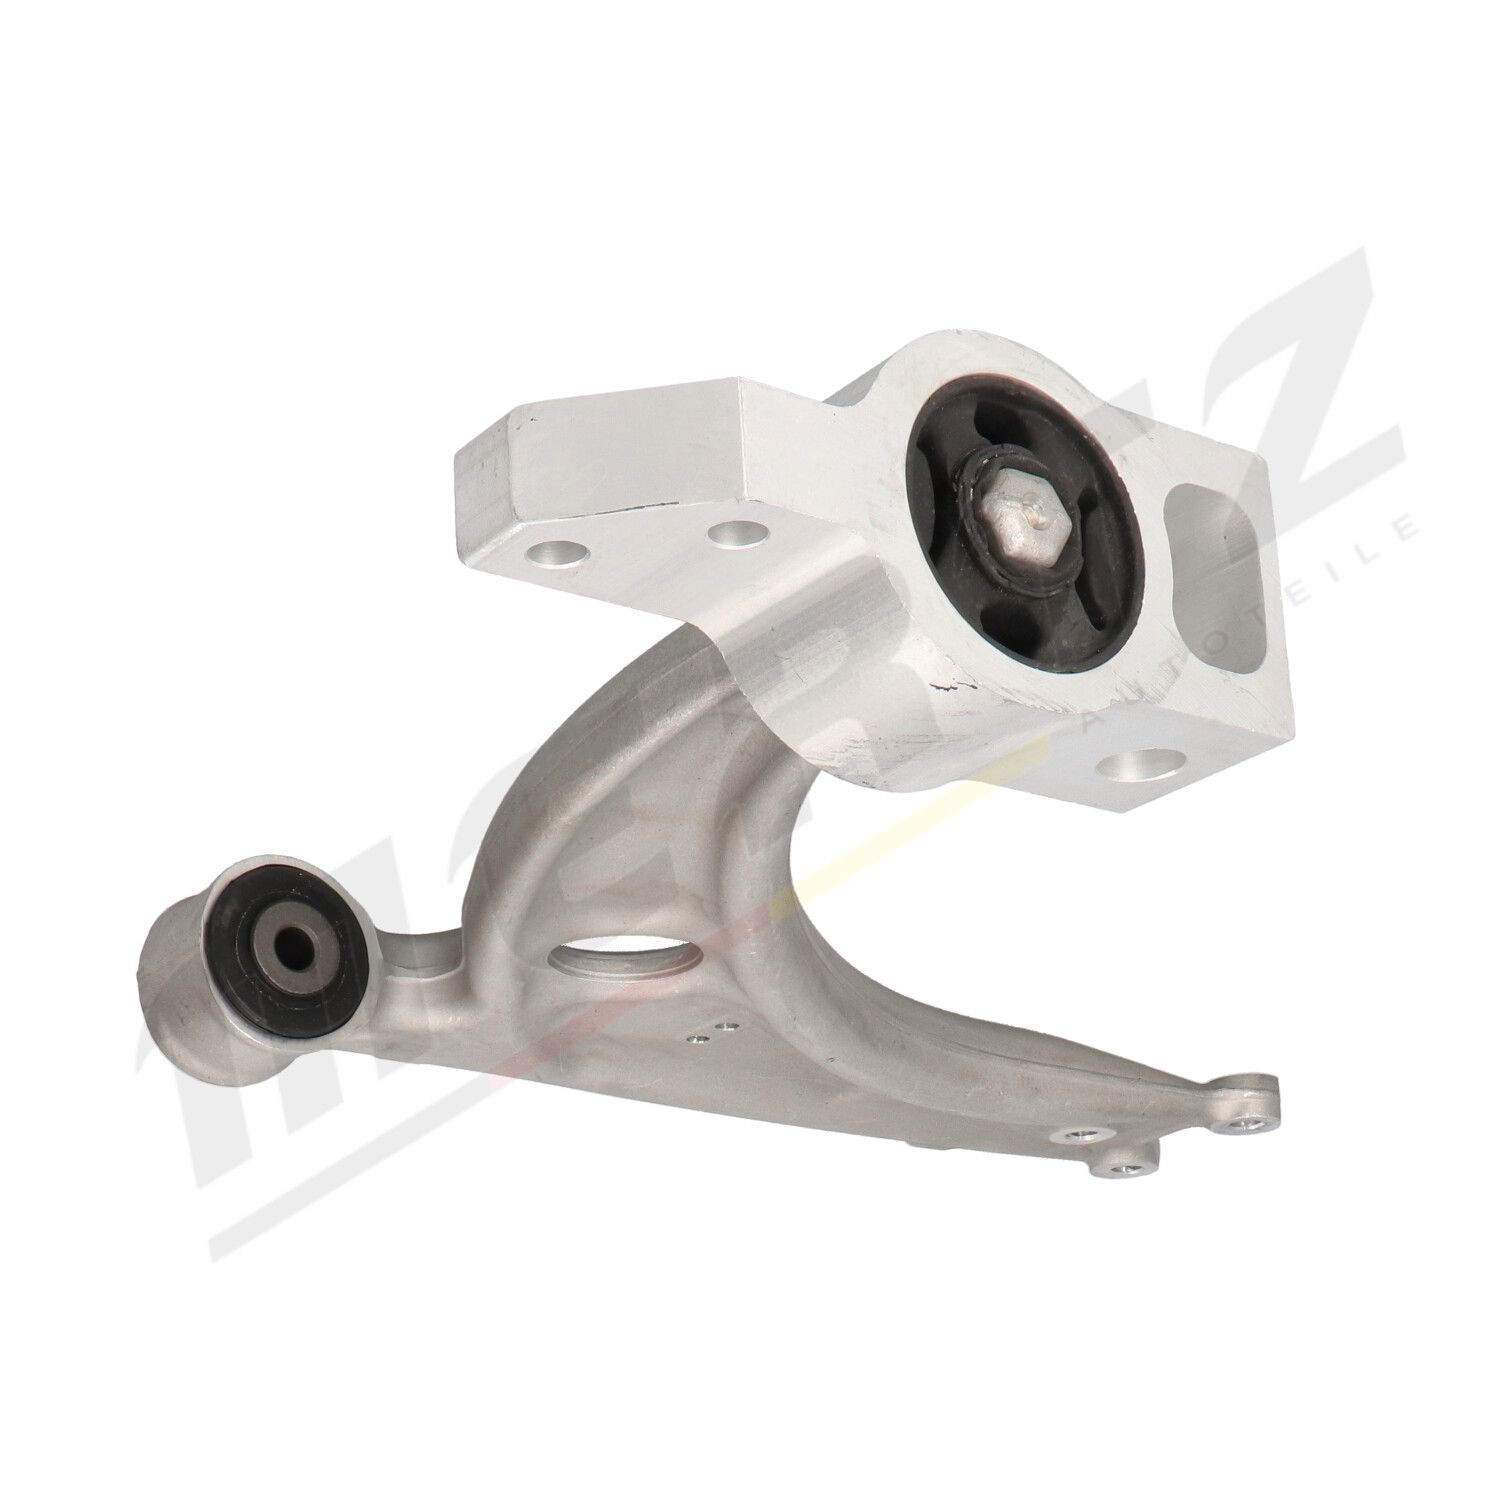 MERTZ M-S0788 Suspension control arm without ball joint, with bearing(s), Front Axle Left, Front Axle Right, Control Arm, Aluminium